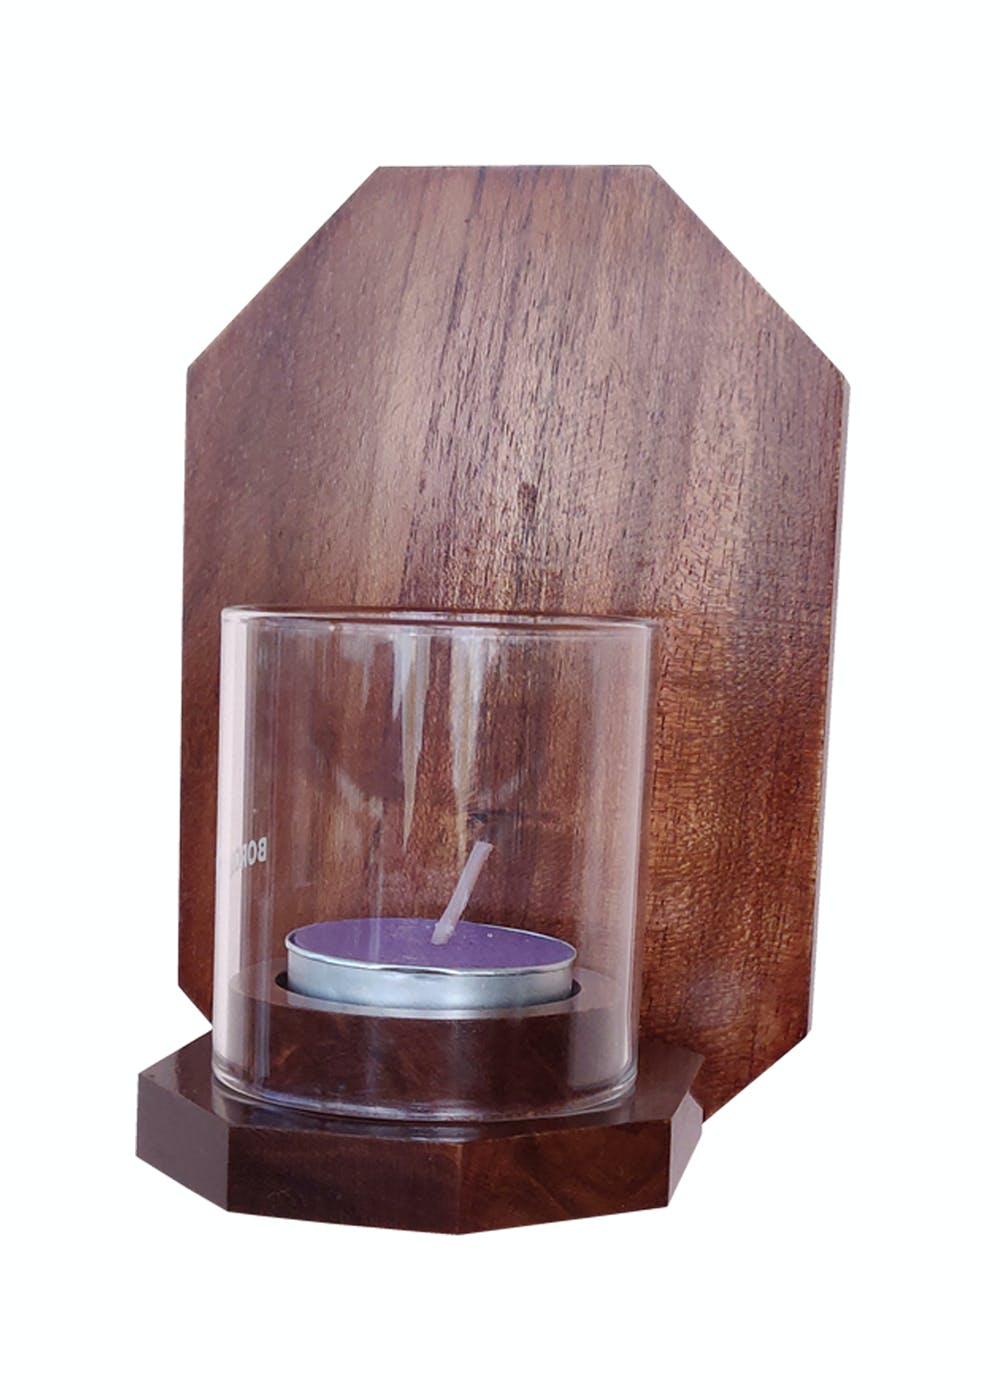 Octagon Wall Tea Light Holder with Glass Chimney